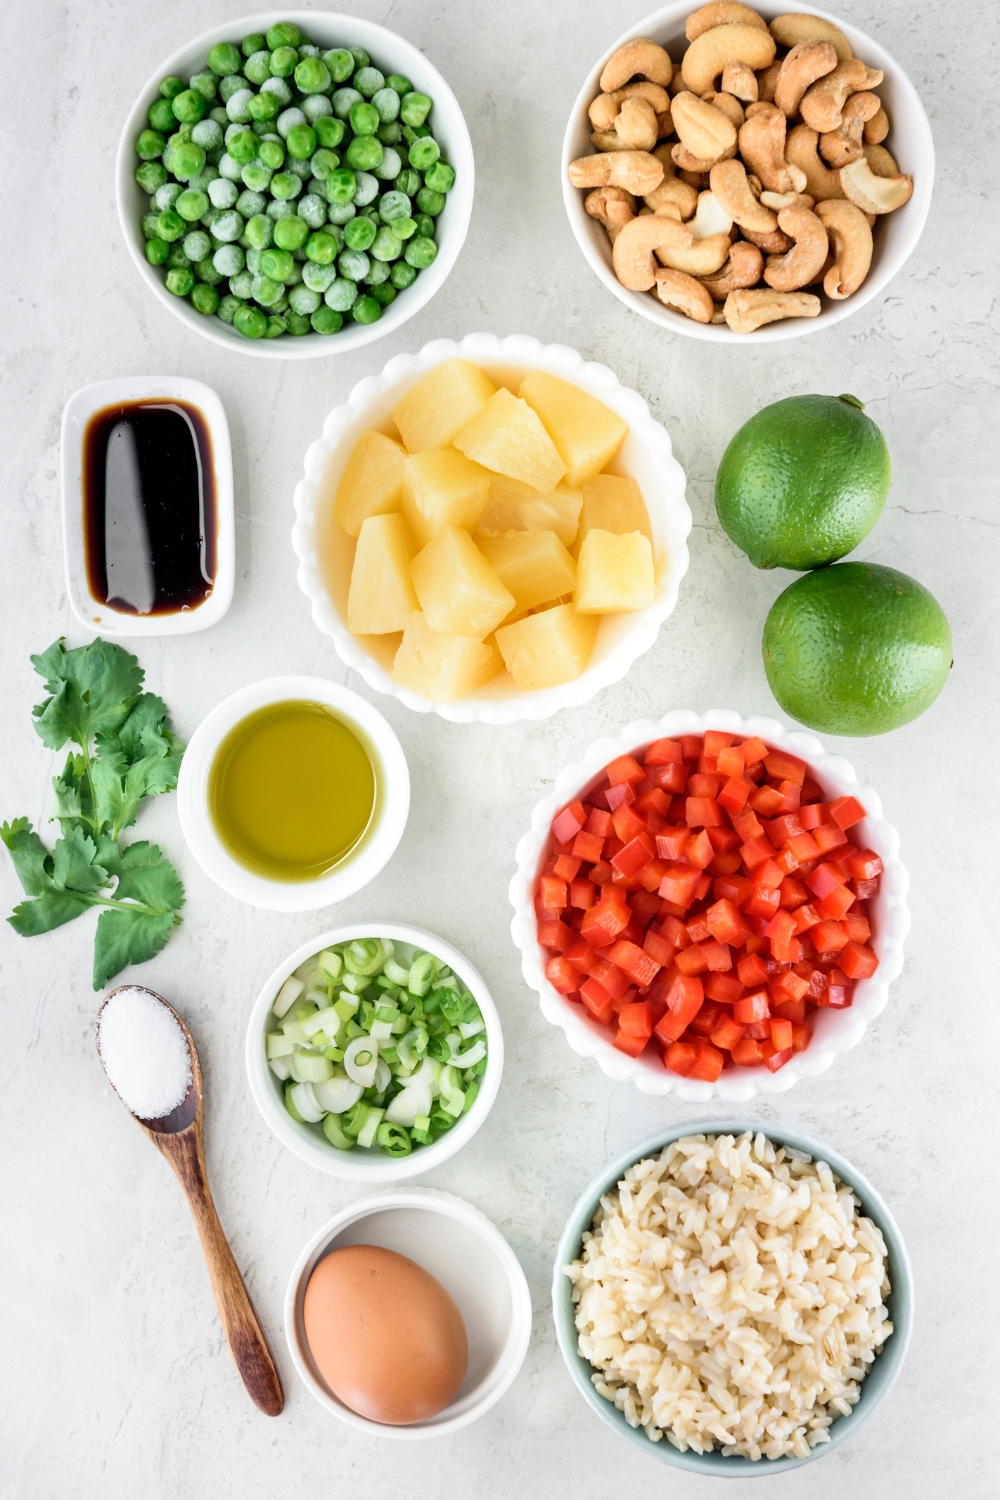 A countertop with pineapple, cashews, peas, soy sauce, olive oil, limes, bell pepper, green onion, rice, salt, cilantro, and an egg in various bowls.